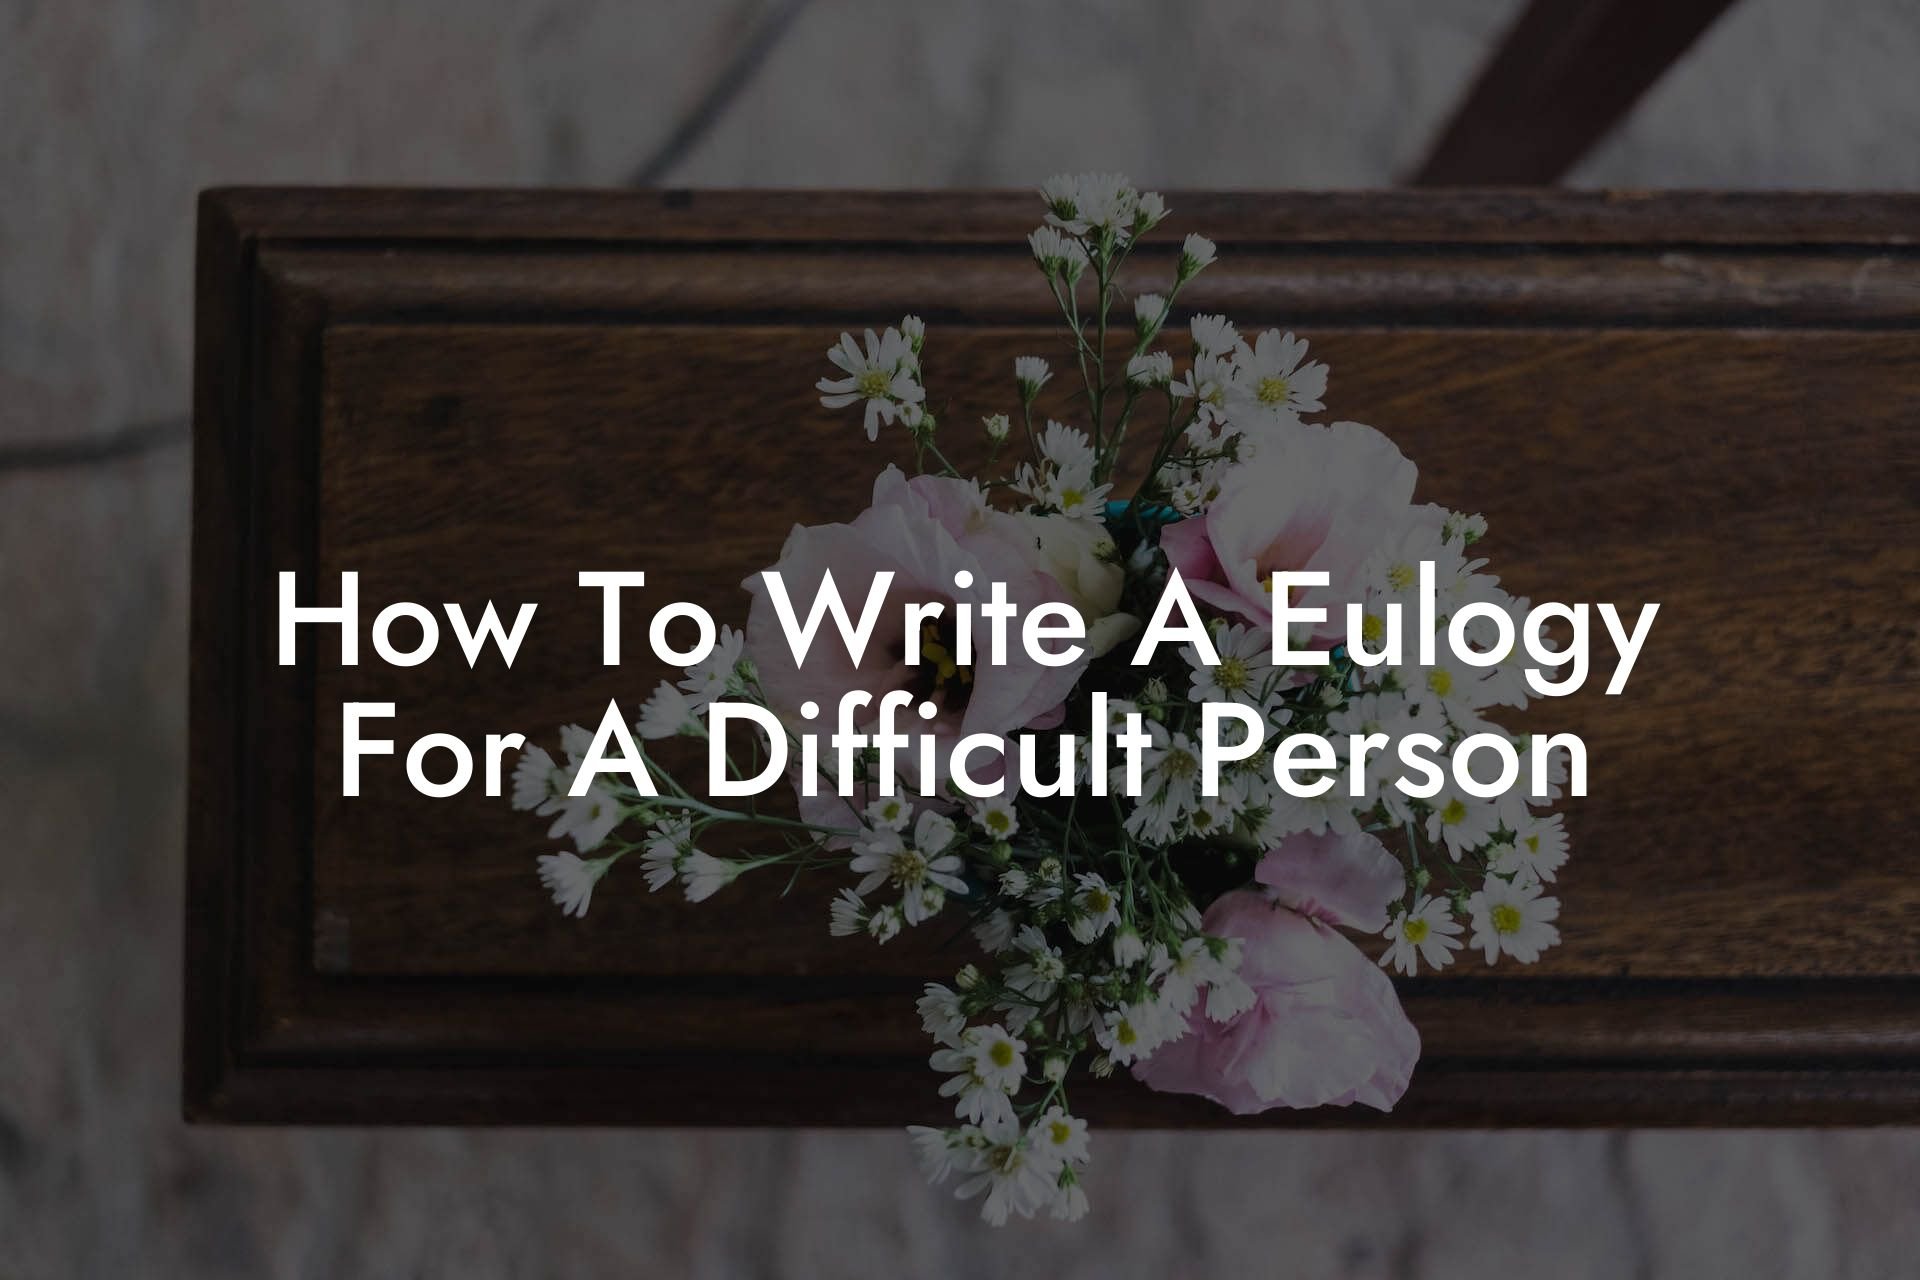 How To Write A Eulogy For A Difficult Person